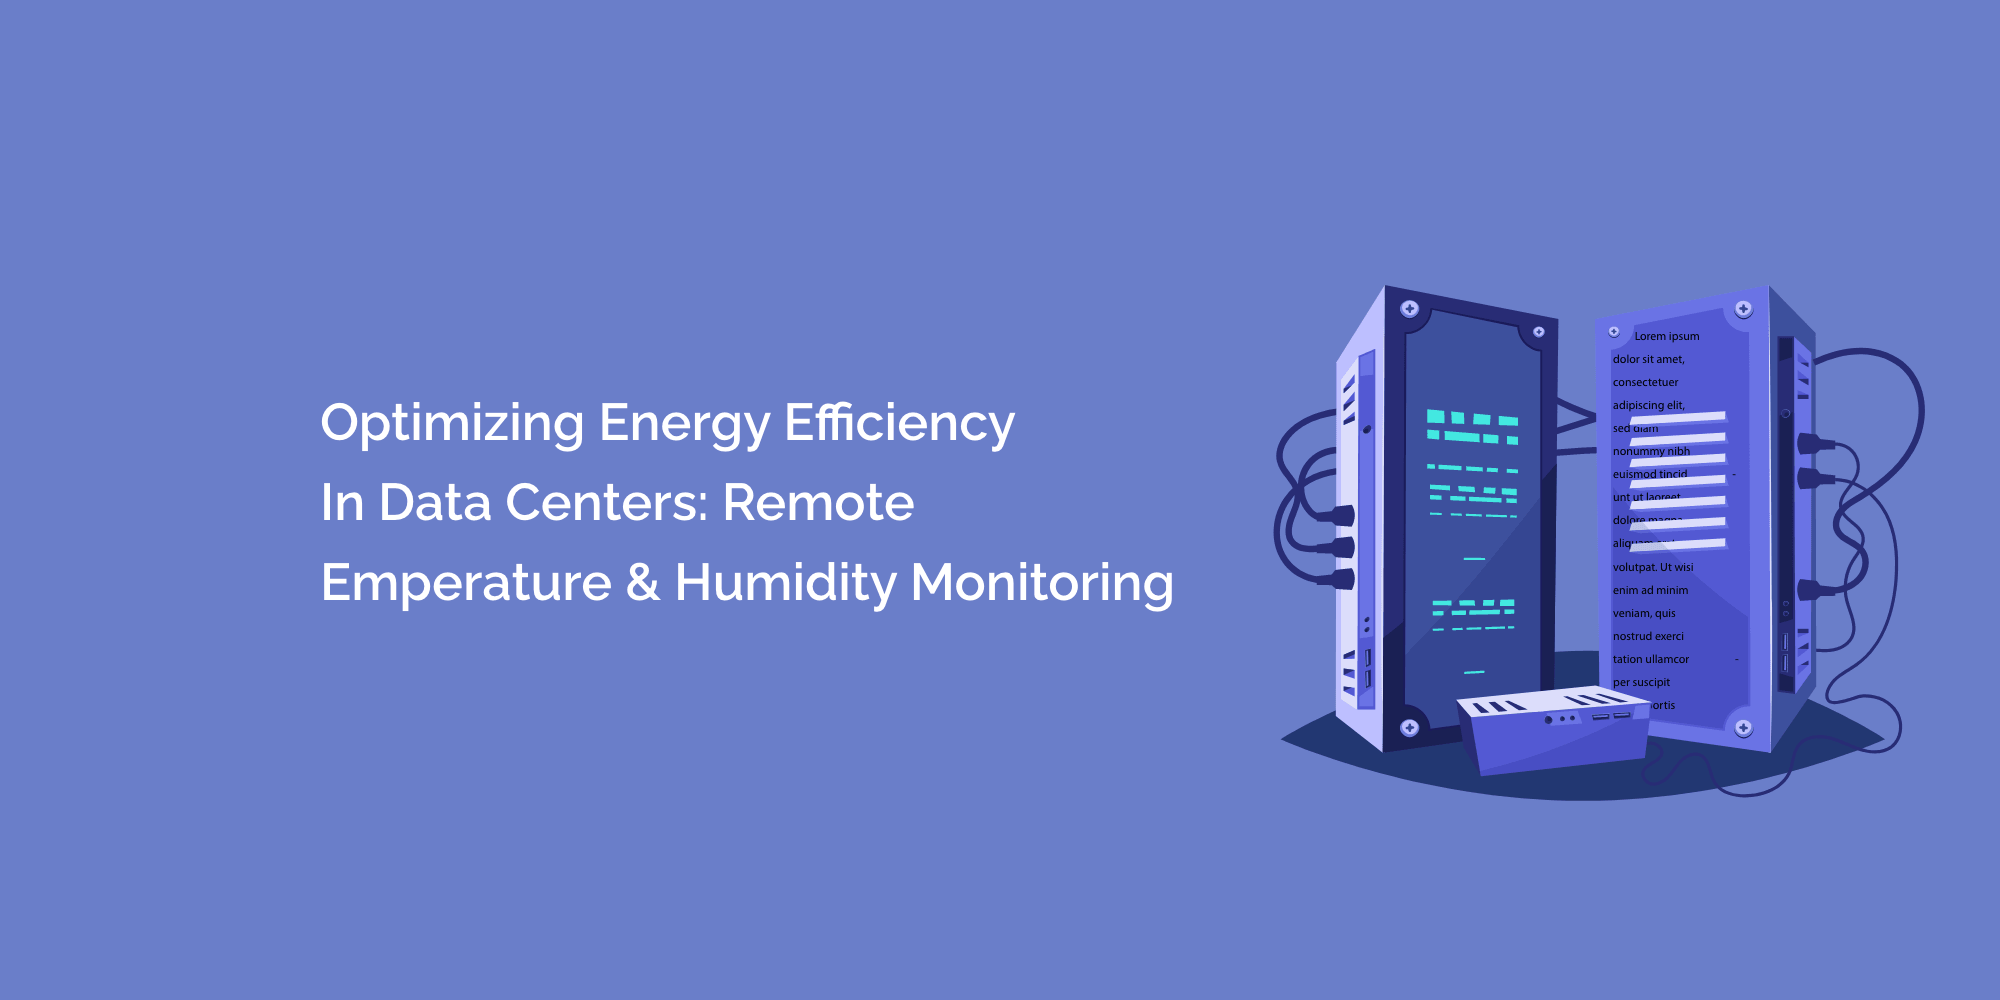 Optimizing Energy Efficiency in Data Centers: Remote Temperature and Humidity Monitoring